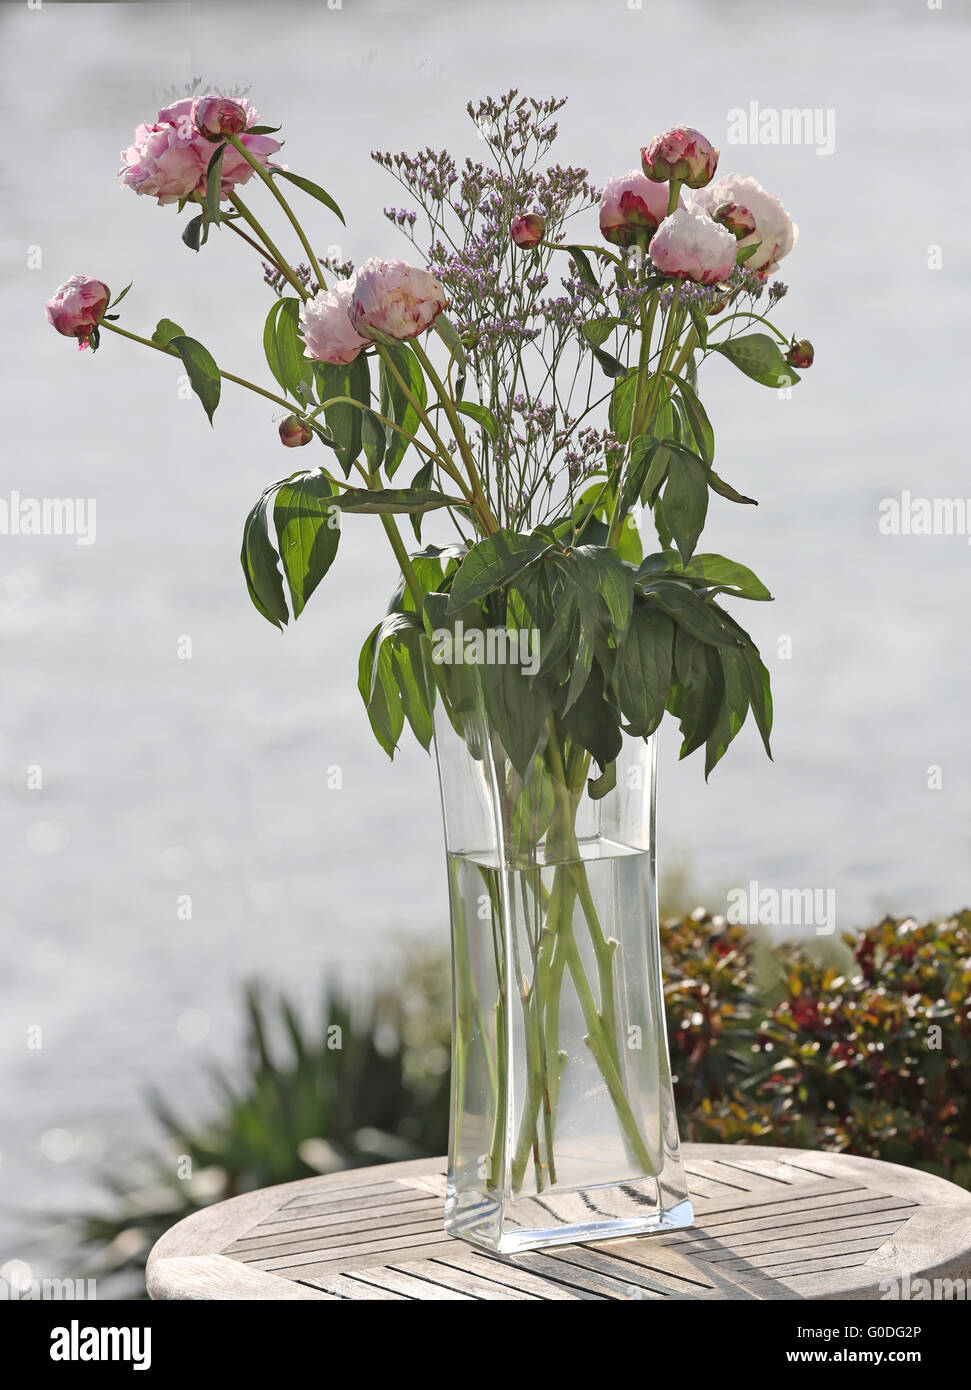 Bunch of peonies in a glas vase Stock Photo